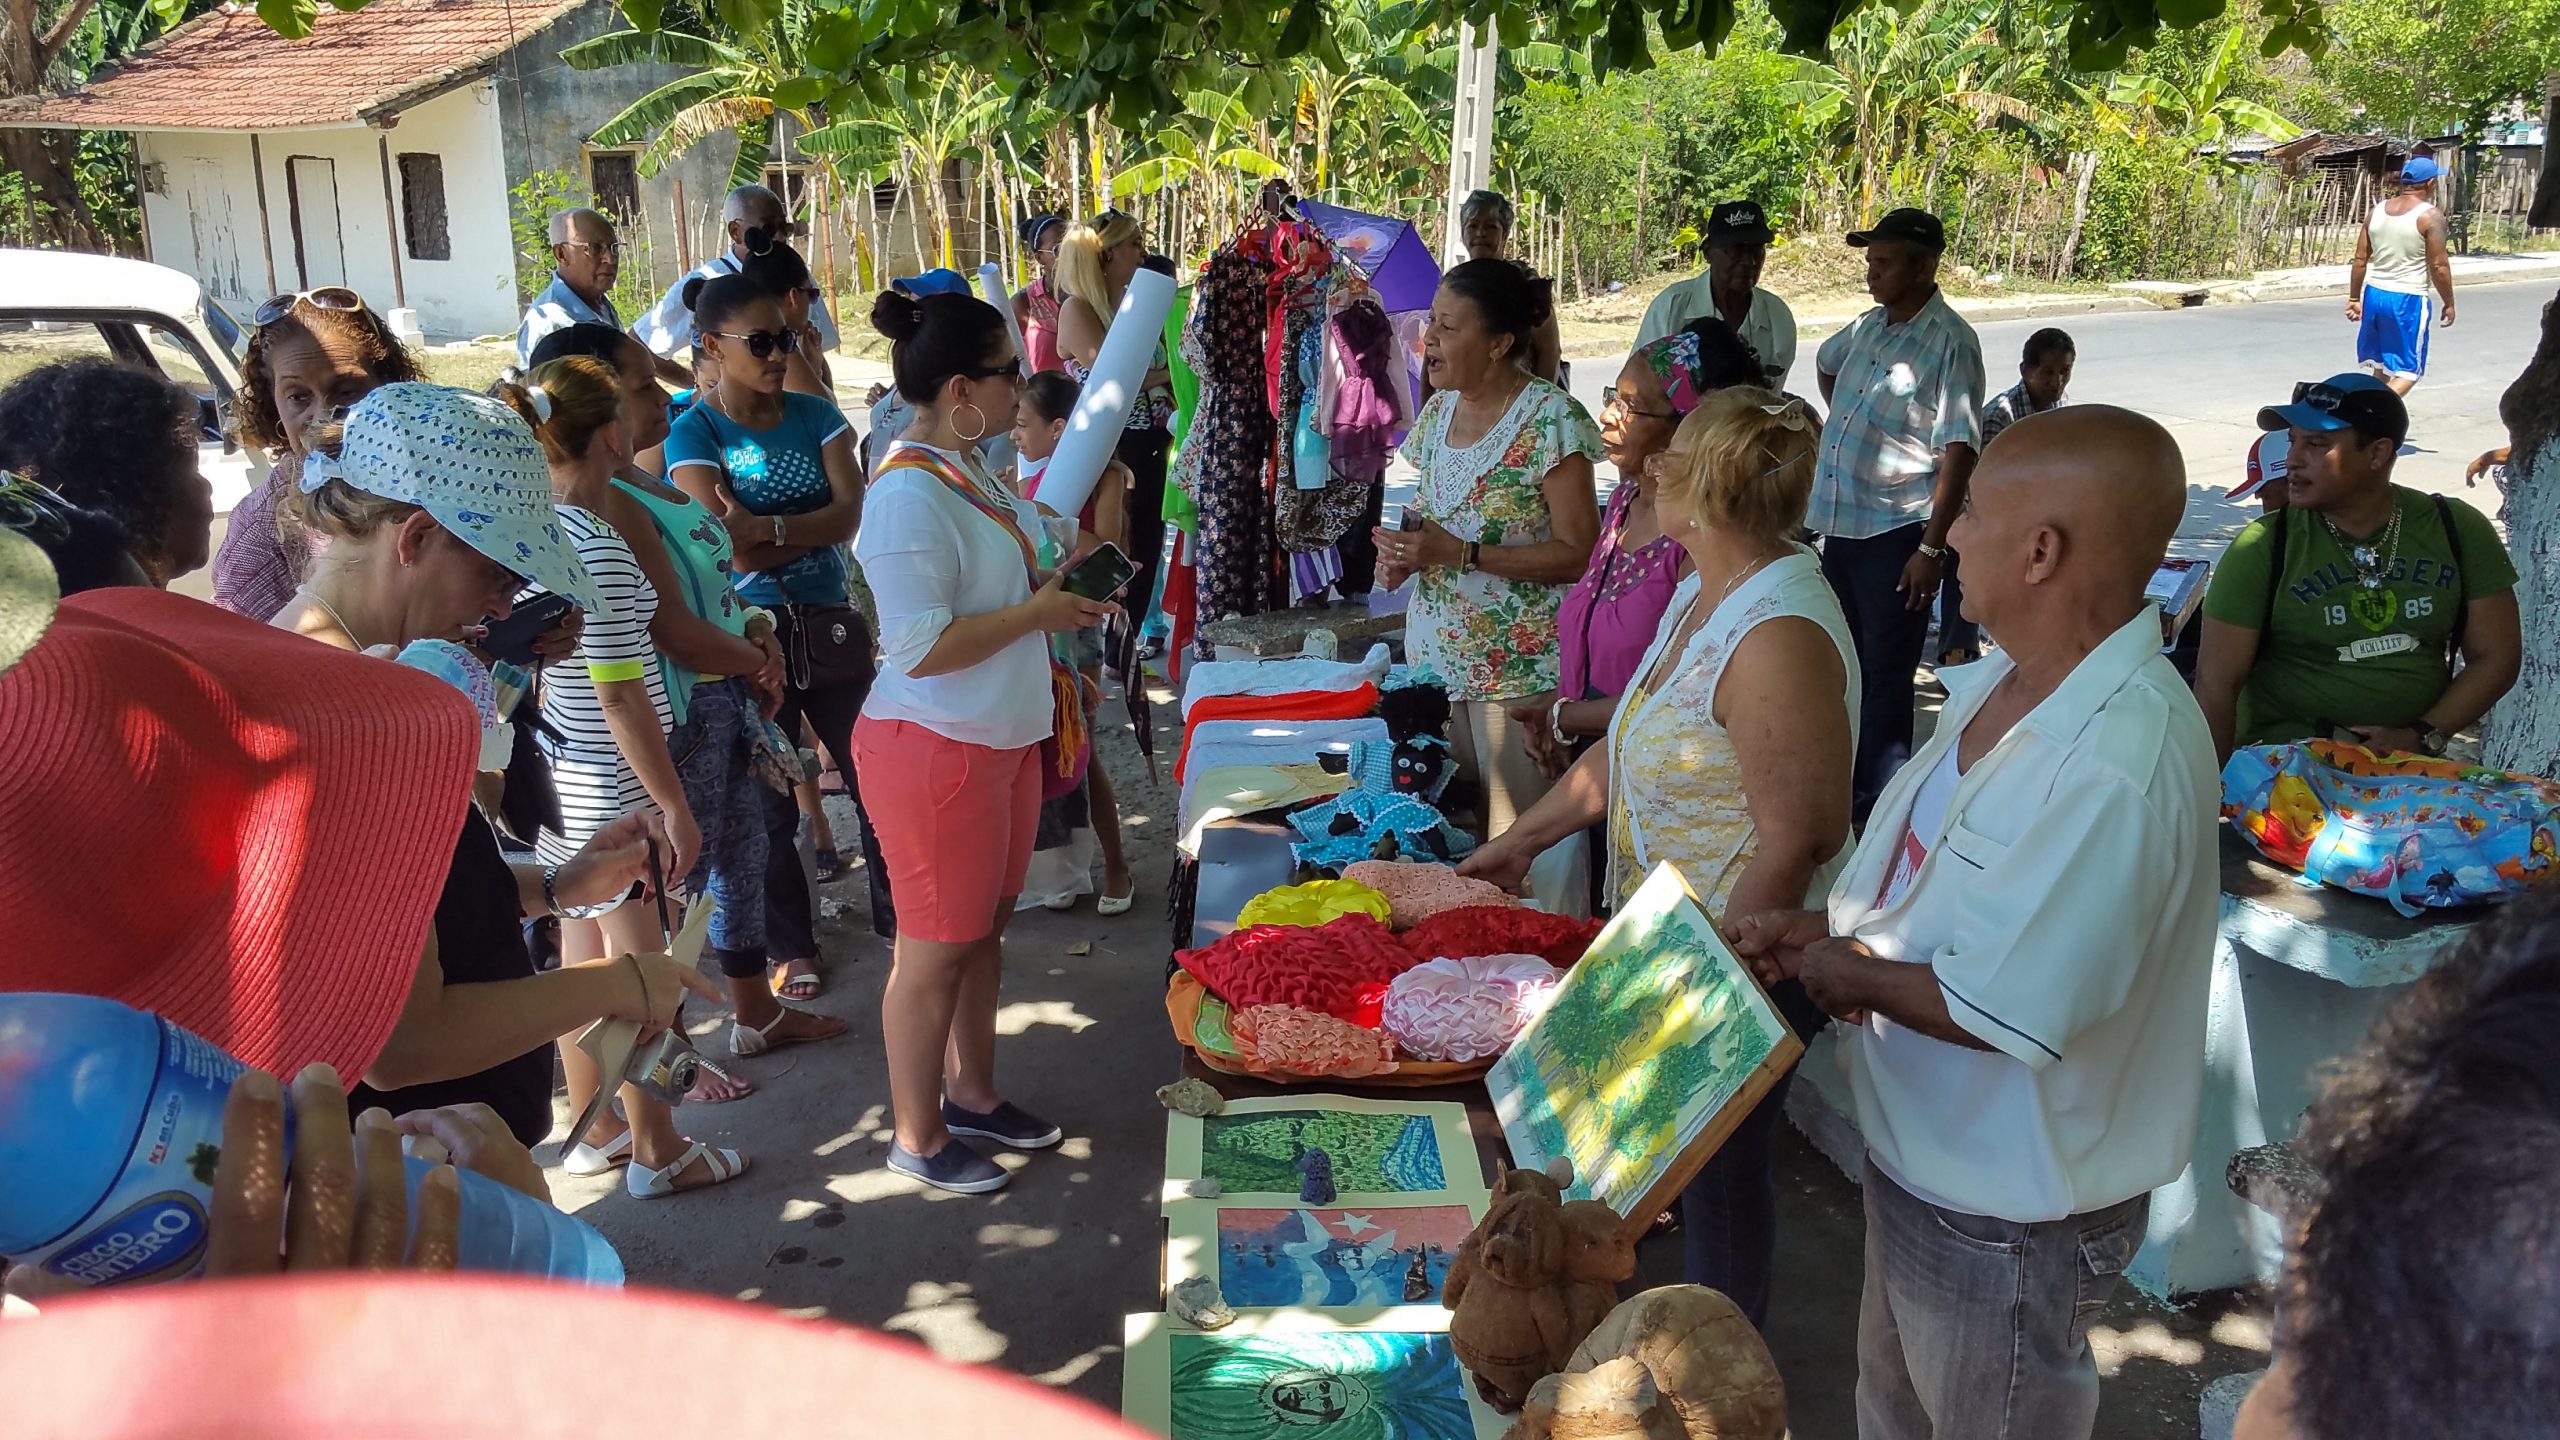 Artisans from the community of Cienfuegos selling their work to conference attendees